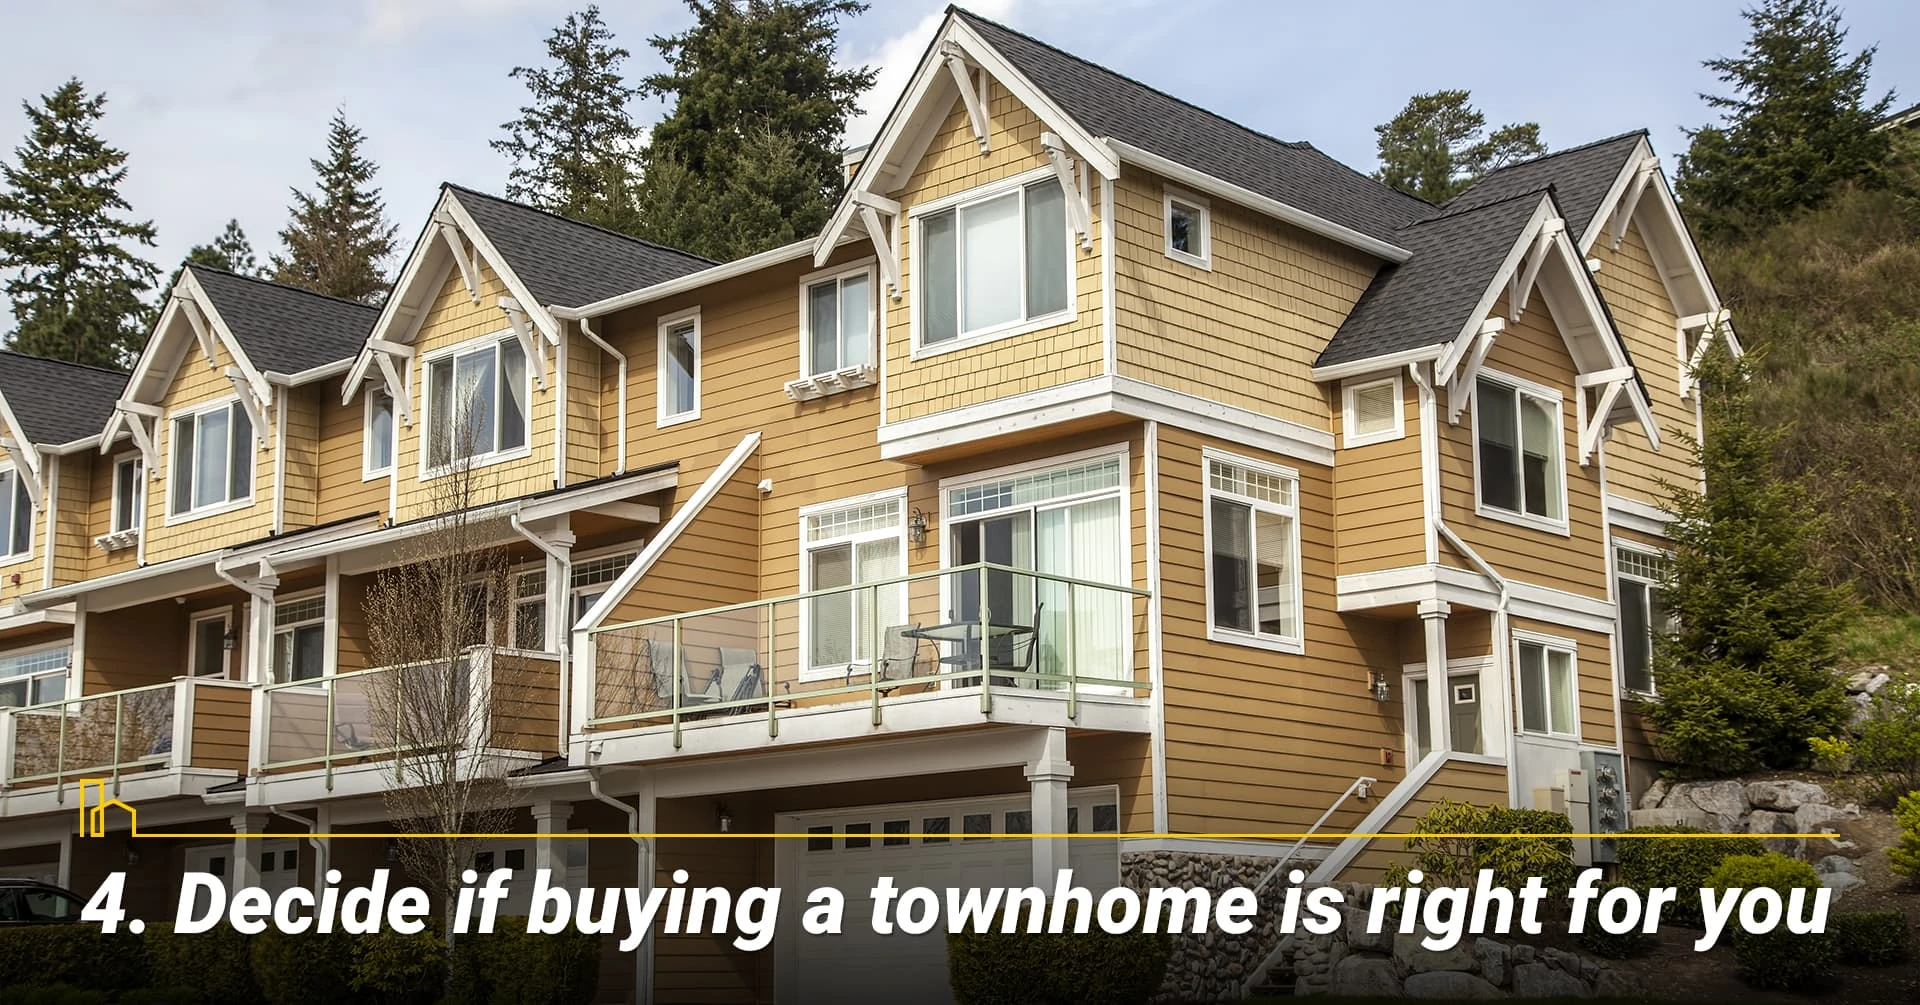 Decide if buying a townhome is right for you, reasons to buy a townhome